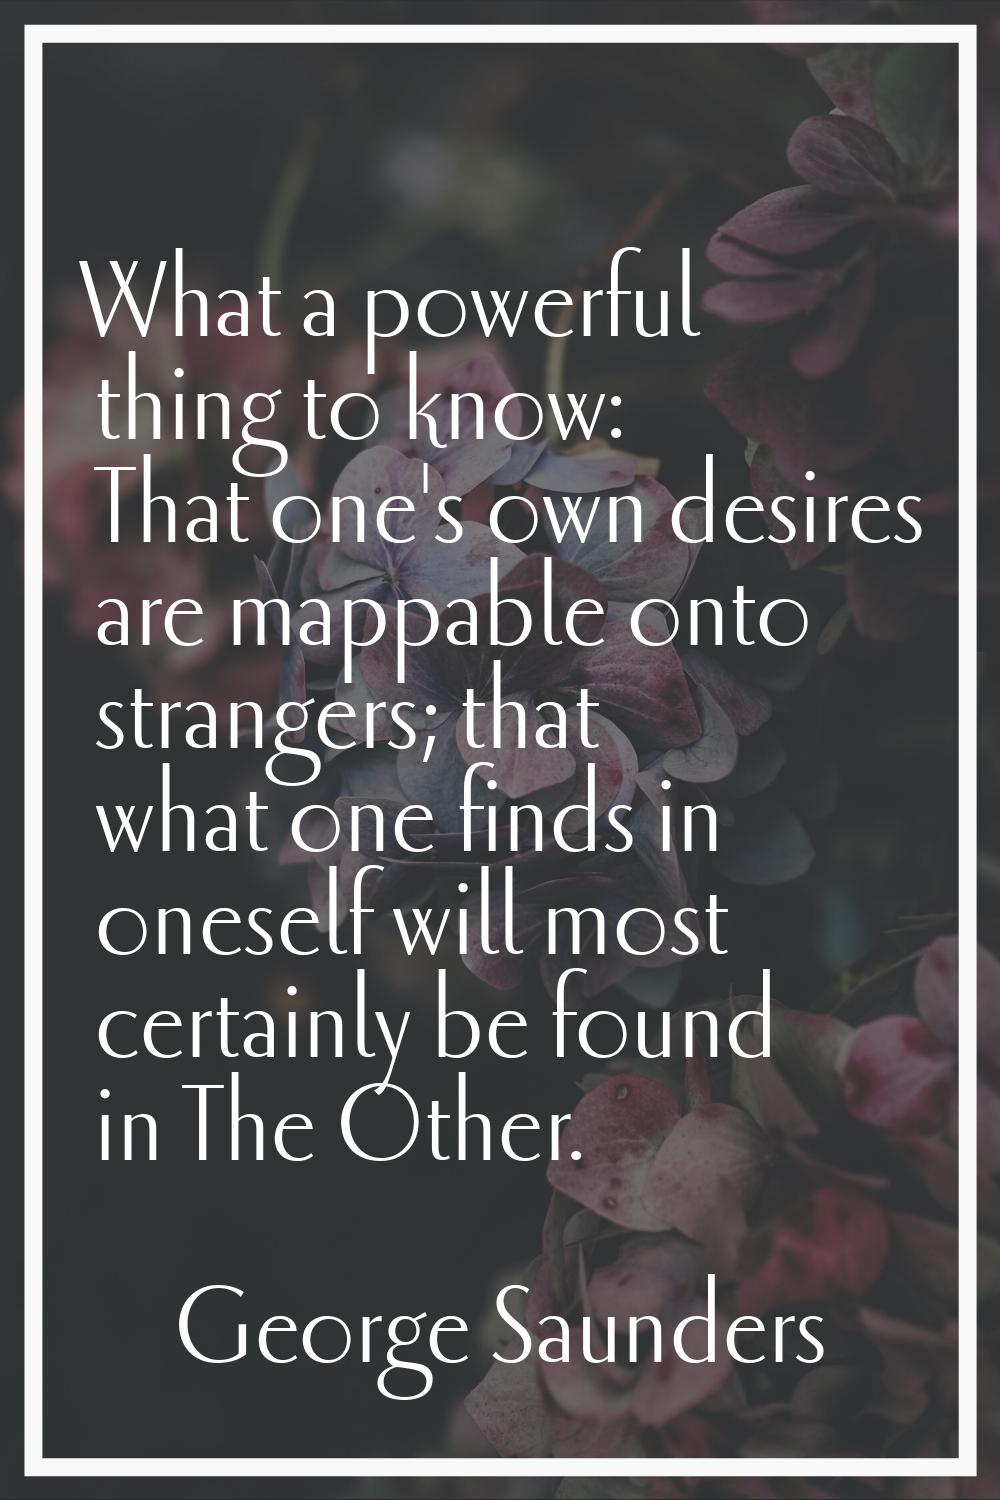 What a powerful thing to know: That one's own desires are mappable onto strangers; that what one fi